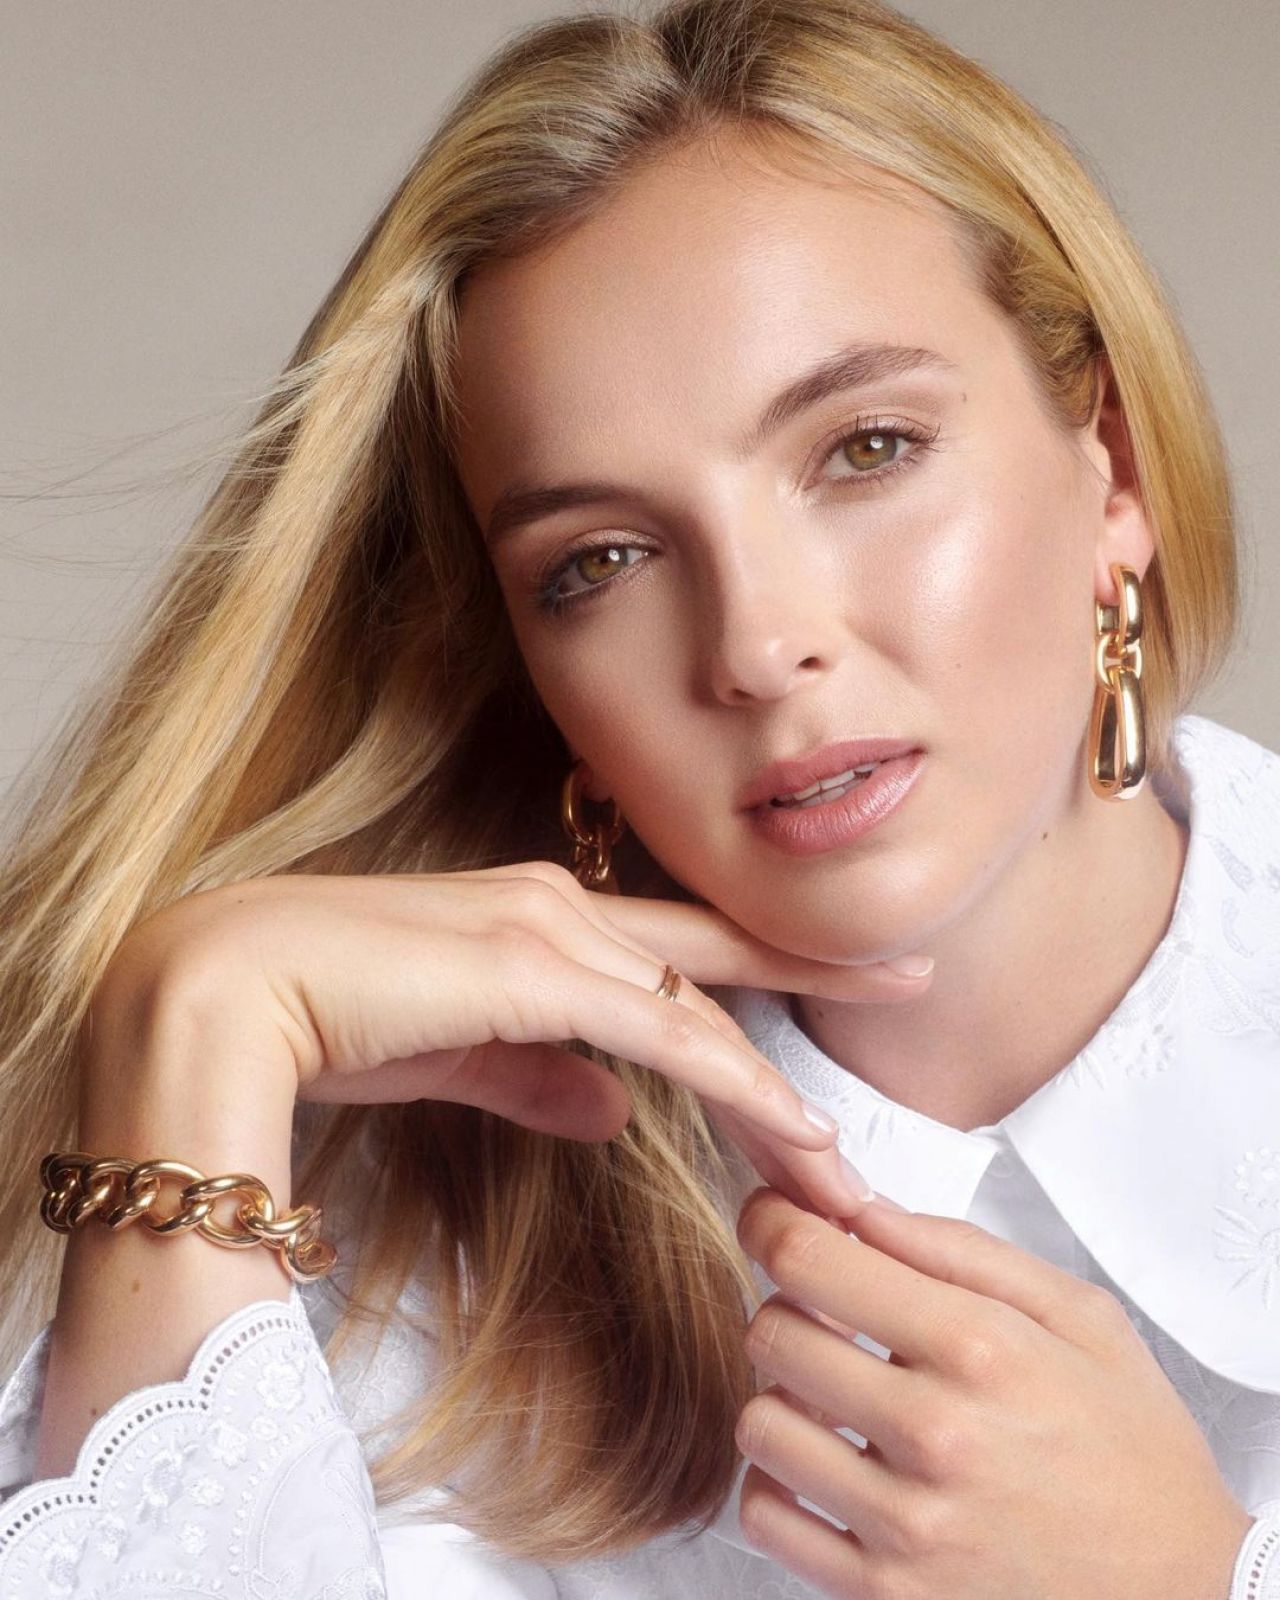 jodie-comer-the-new-face-of-skincare-brand-noble-panacea-2020-21.jpg